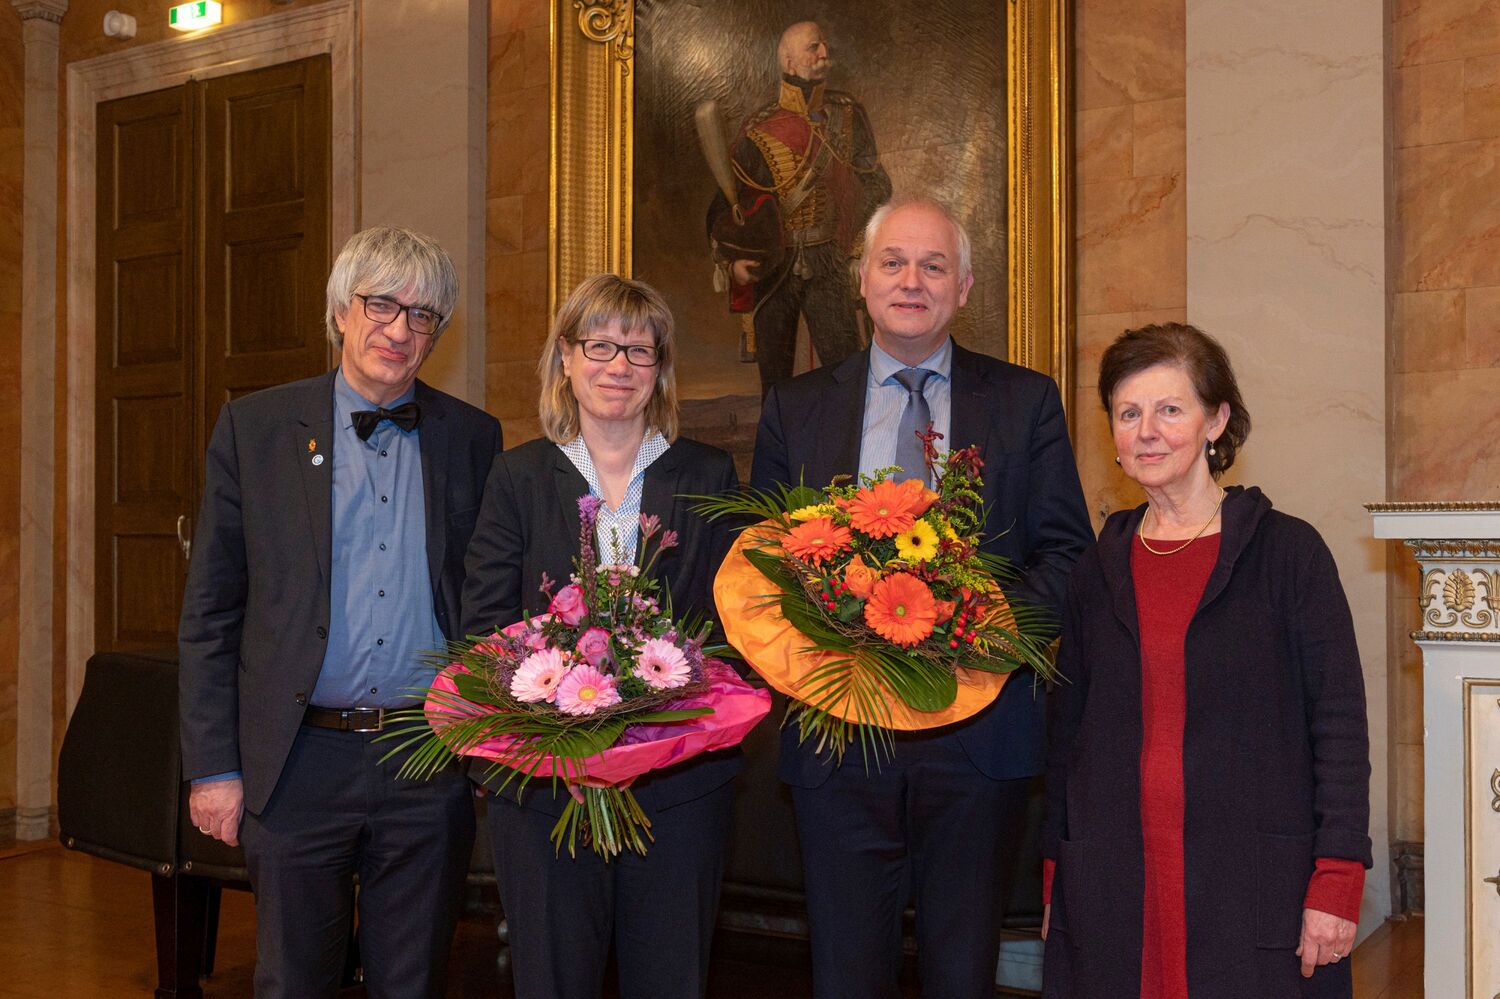 The Senate of the University of Göttingen has elected linguist Professor Anke Holler and agricultural economist Professor Bernhard Brümmer as Vice-Presidents of the University for another term. On the left, University President Professor Metin Tolan, on the right, Chair of the Senate Professor Margarete Boos.